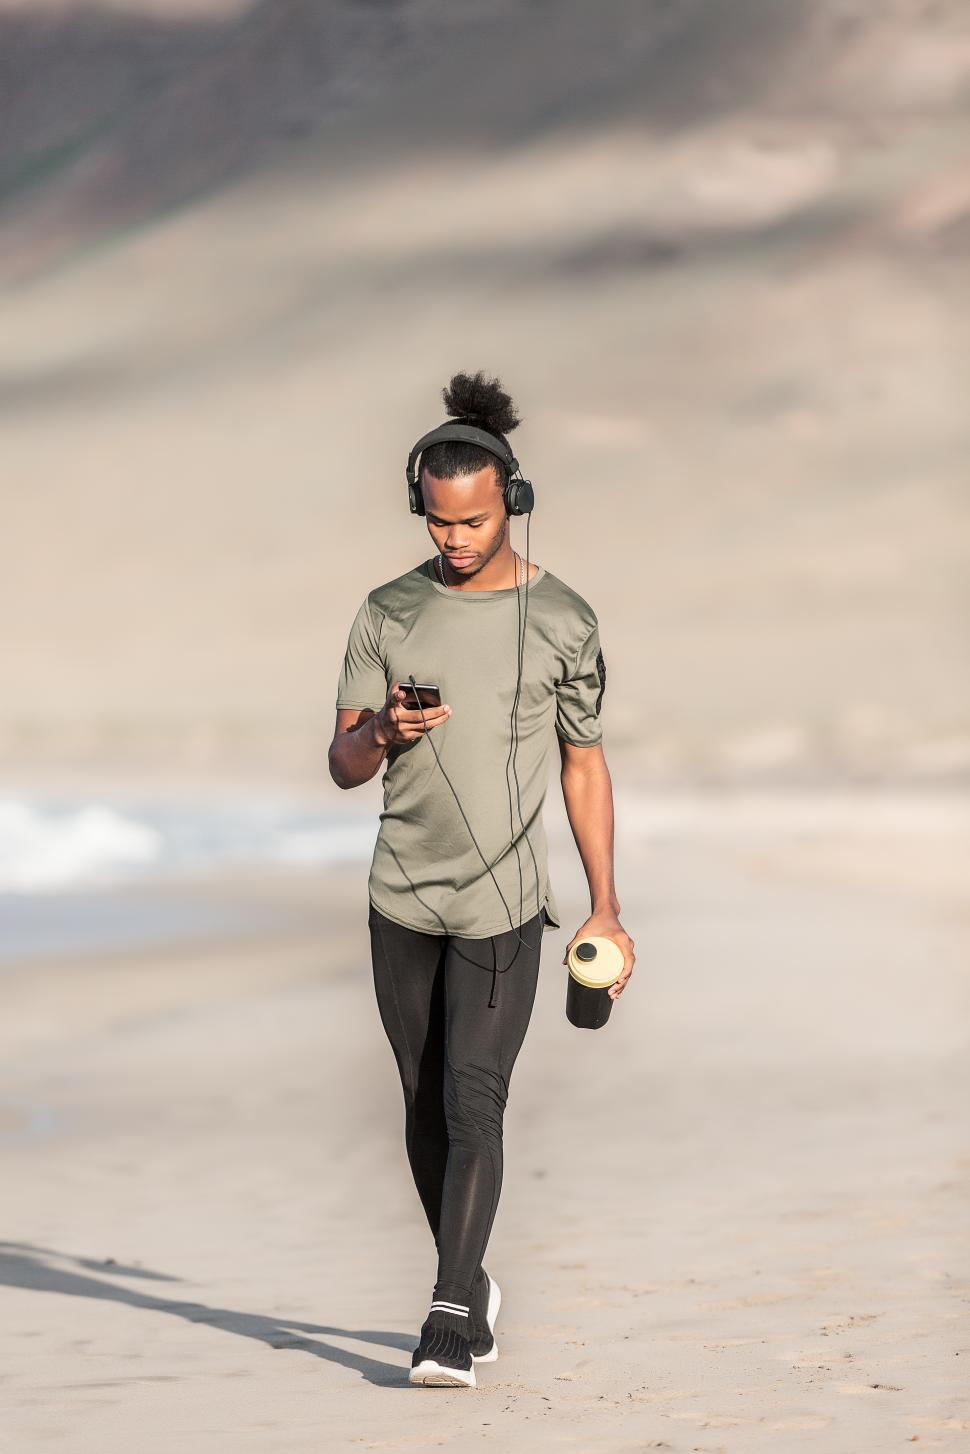 Free Image of Black guy with cup and smartphone walking on seashore 